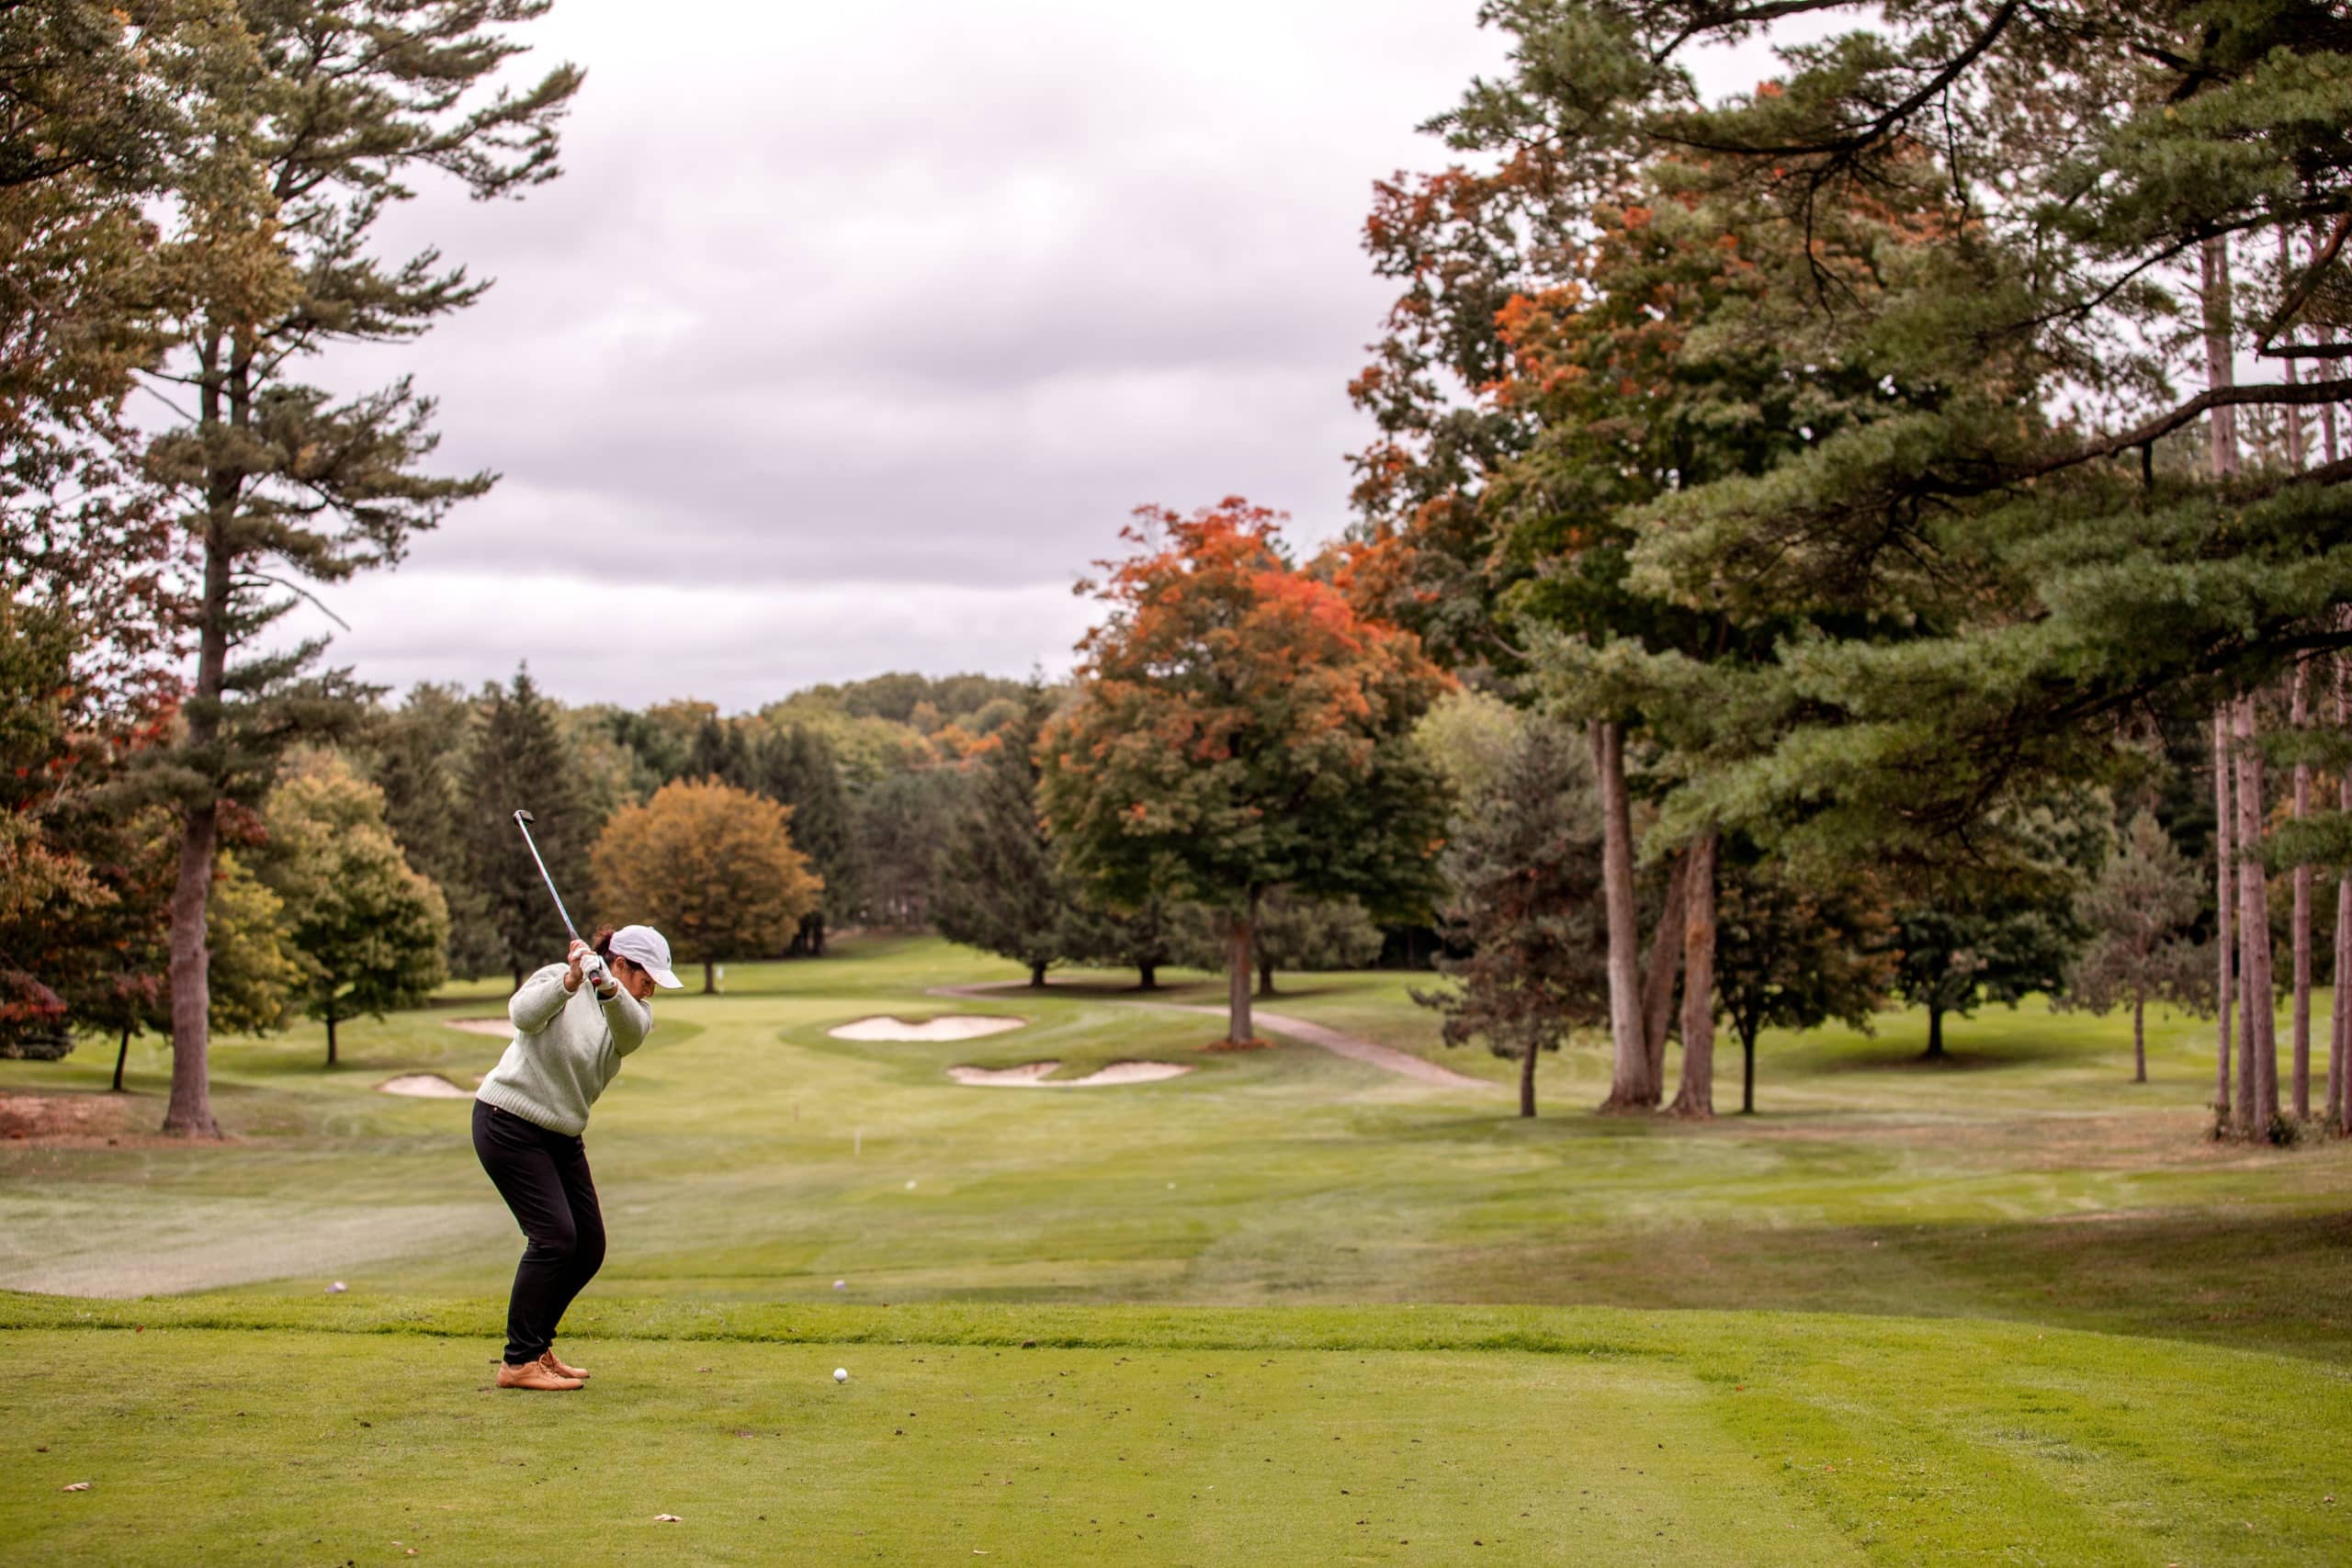 Lois swings her golf club in preparation to hit the ball of the tee block. The trees in the background are starting to change colour for fall.